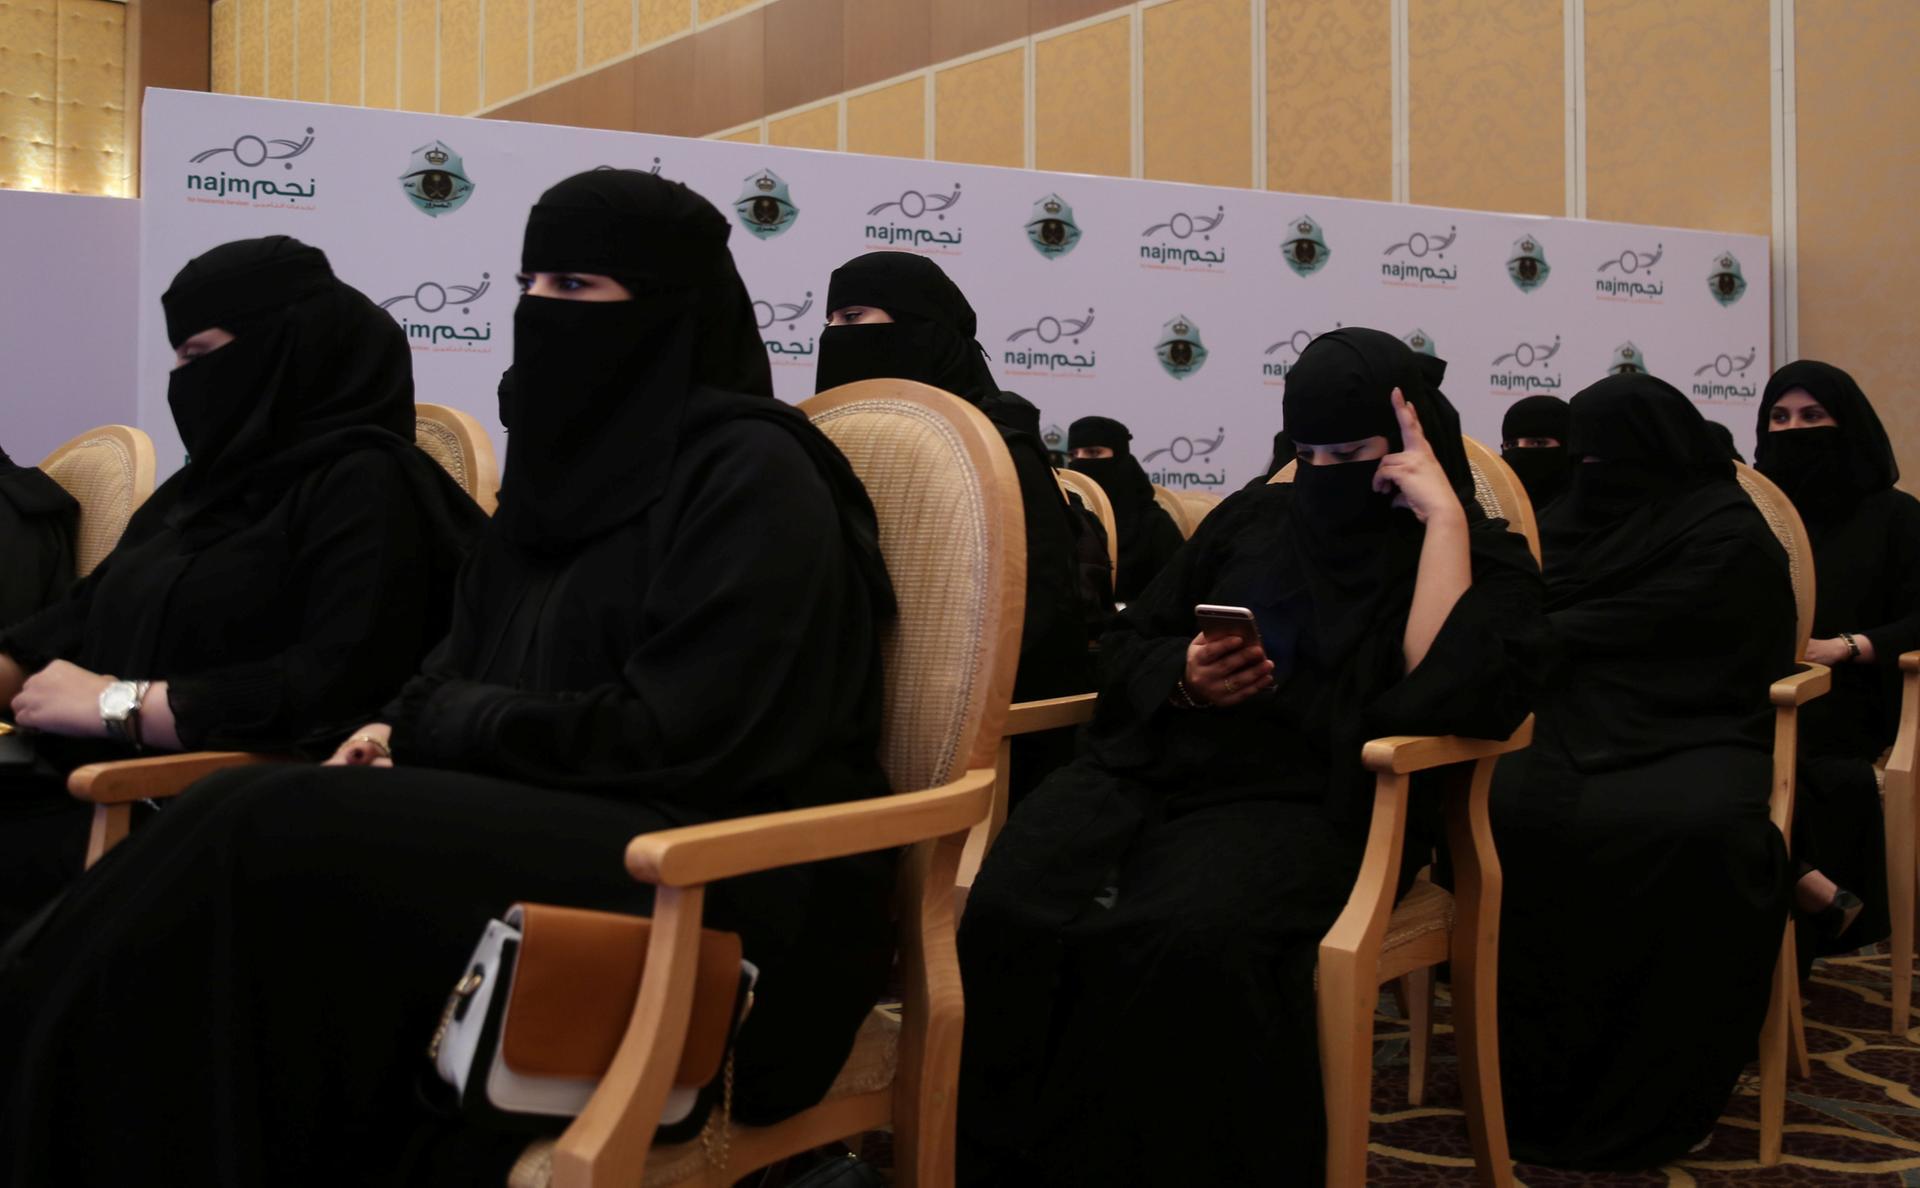 Audience attends the graduation ceremony of Saudi women car-accident inspectors, a few days before women are set to take the wheel in Riyadh, Saudi Arabia June 21, 2018. Picture taken June 21, 2018. REUTERS/Sarah Dadouch